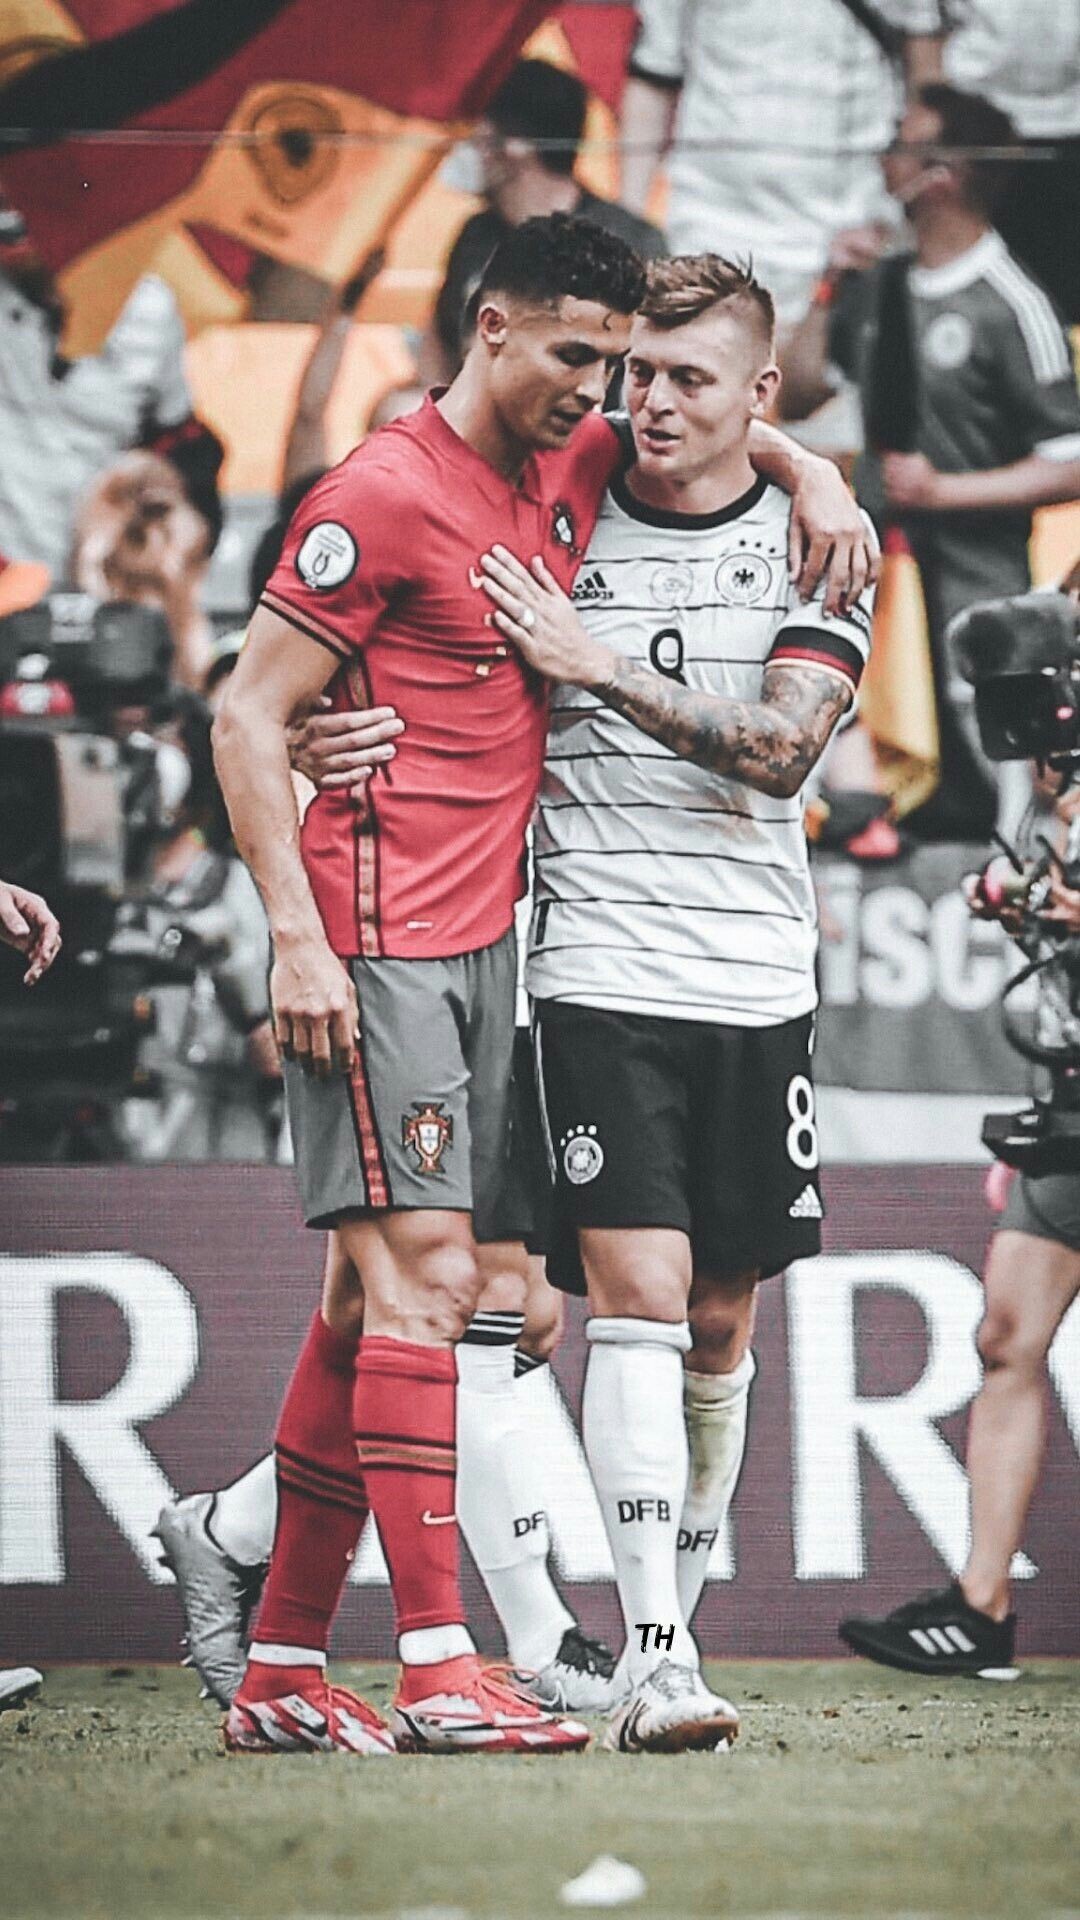 Germany National Football Team: Toni Kroos and Cristiano Ronaldo, Germany's 4-2 Euro 2020 win over Portugal. 1080x1920 Full HD Background.